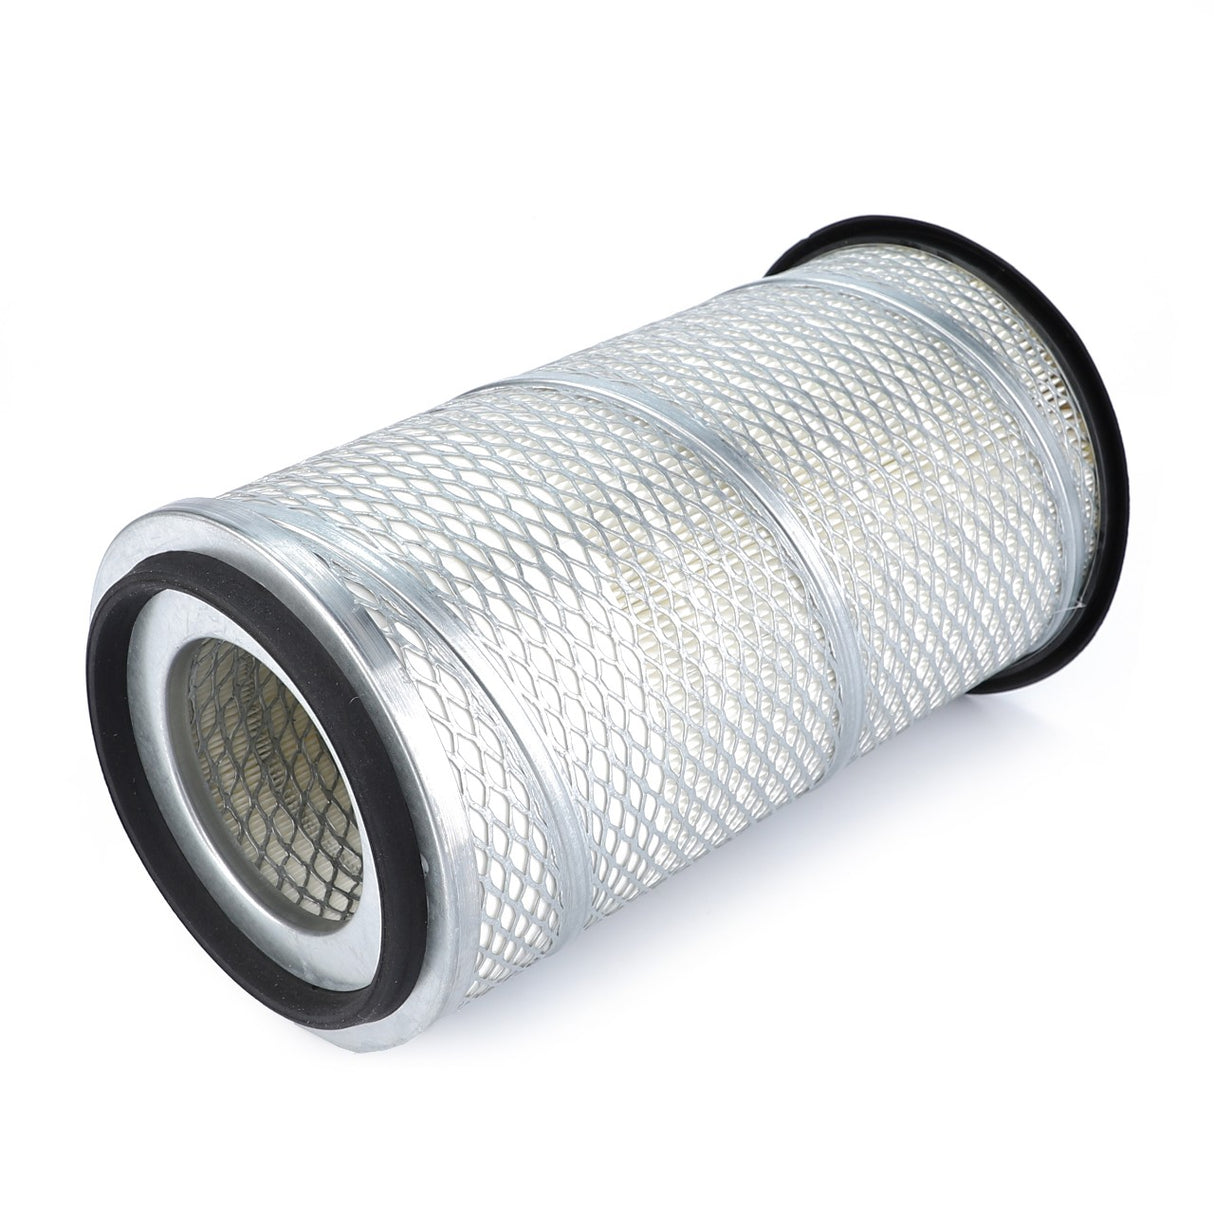 *STOCK CLEARANCE* - Filter - 1698374M2 - Farming Parts